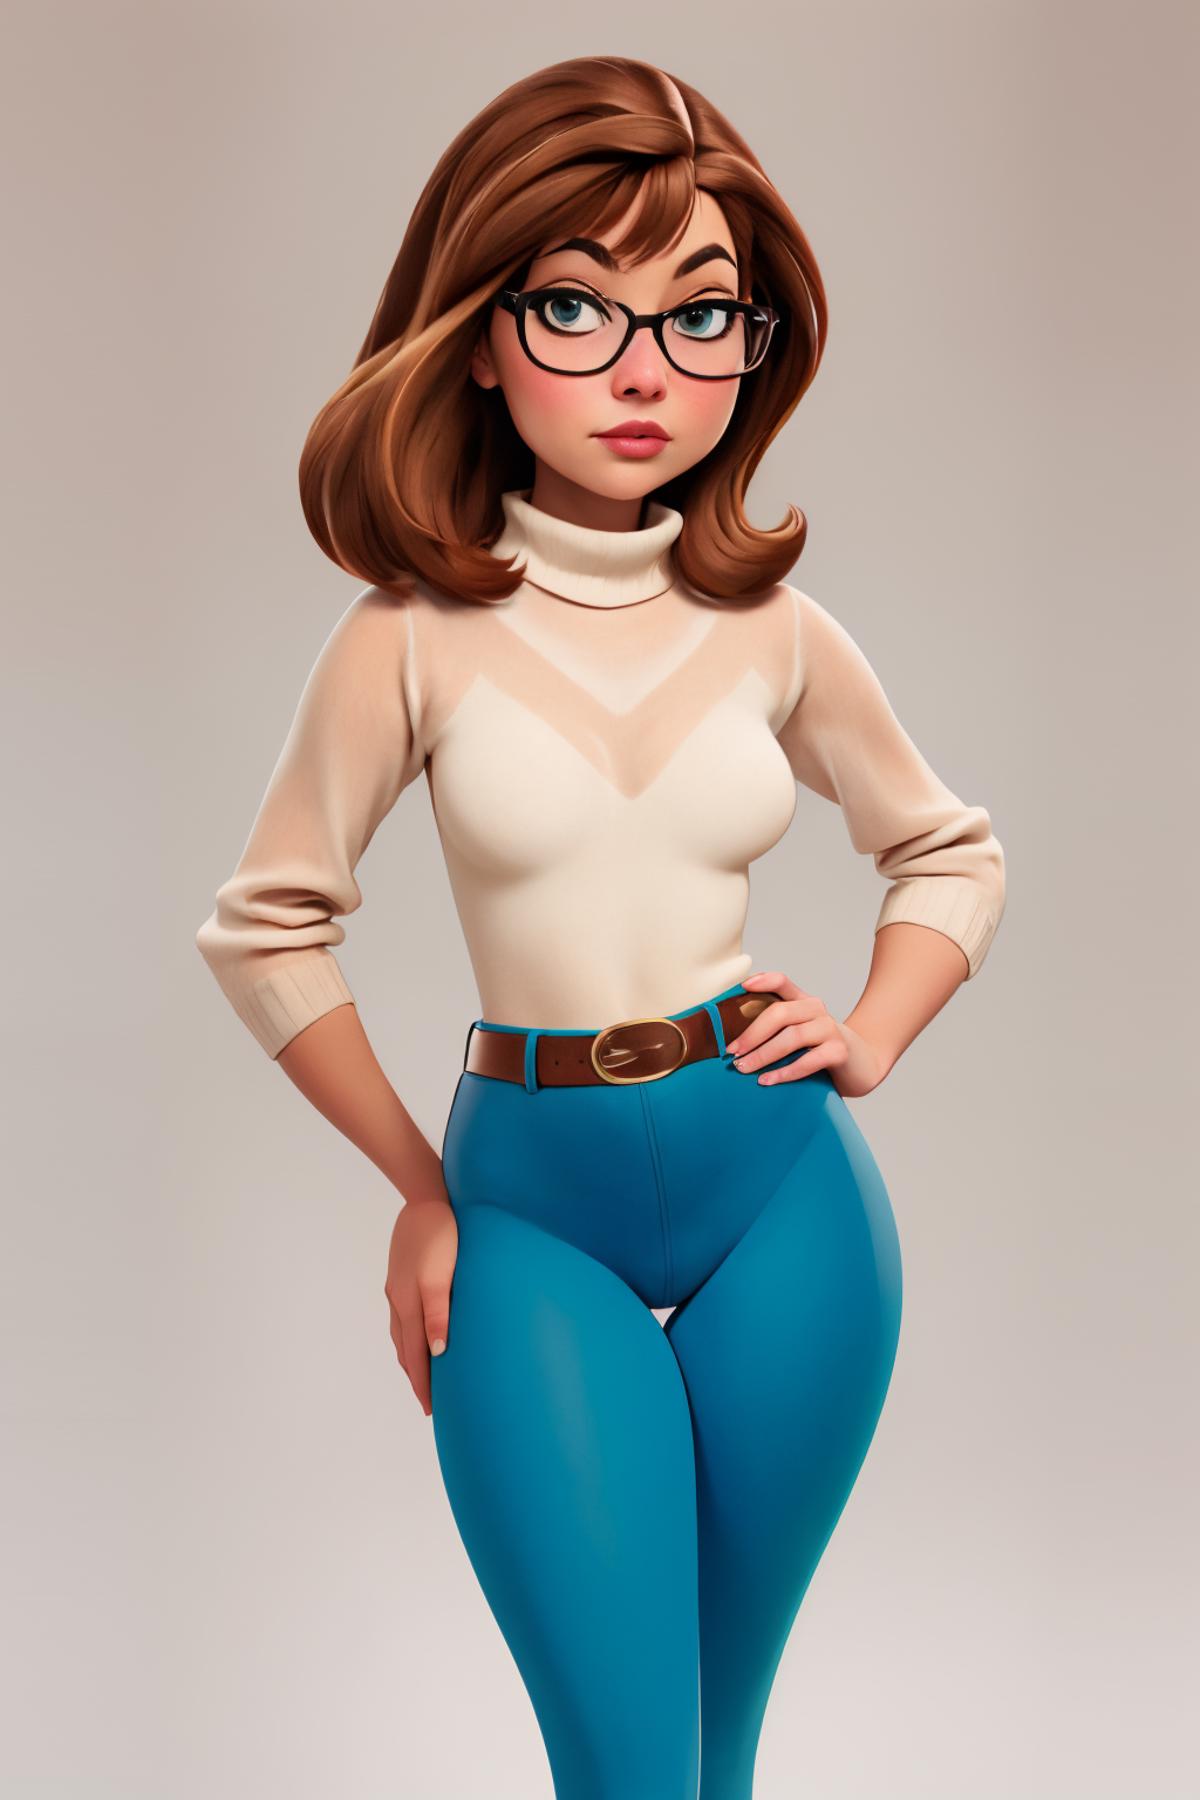 Bruce Timm Style Inspired Female Characters image by NestOrtiz3D